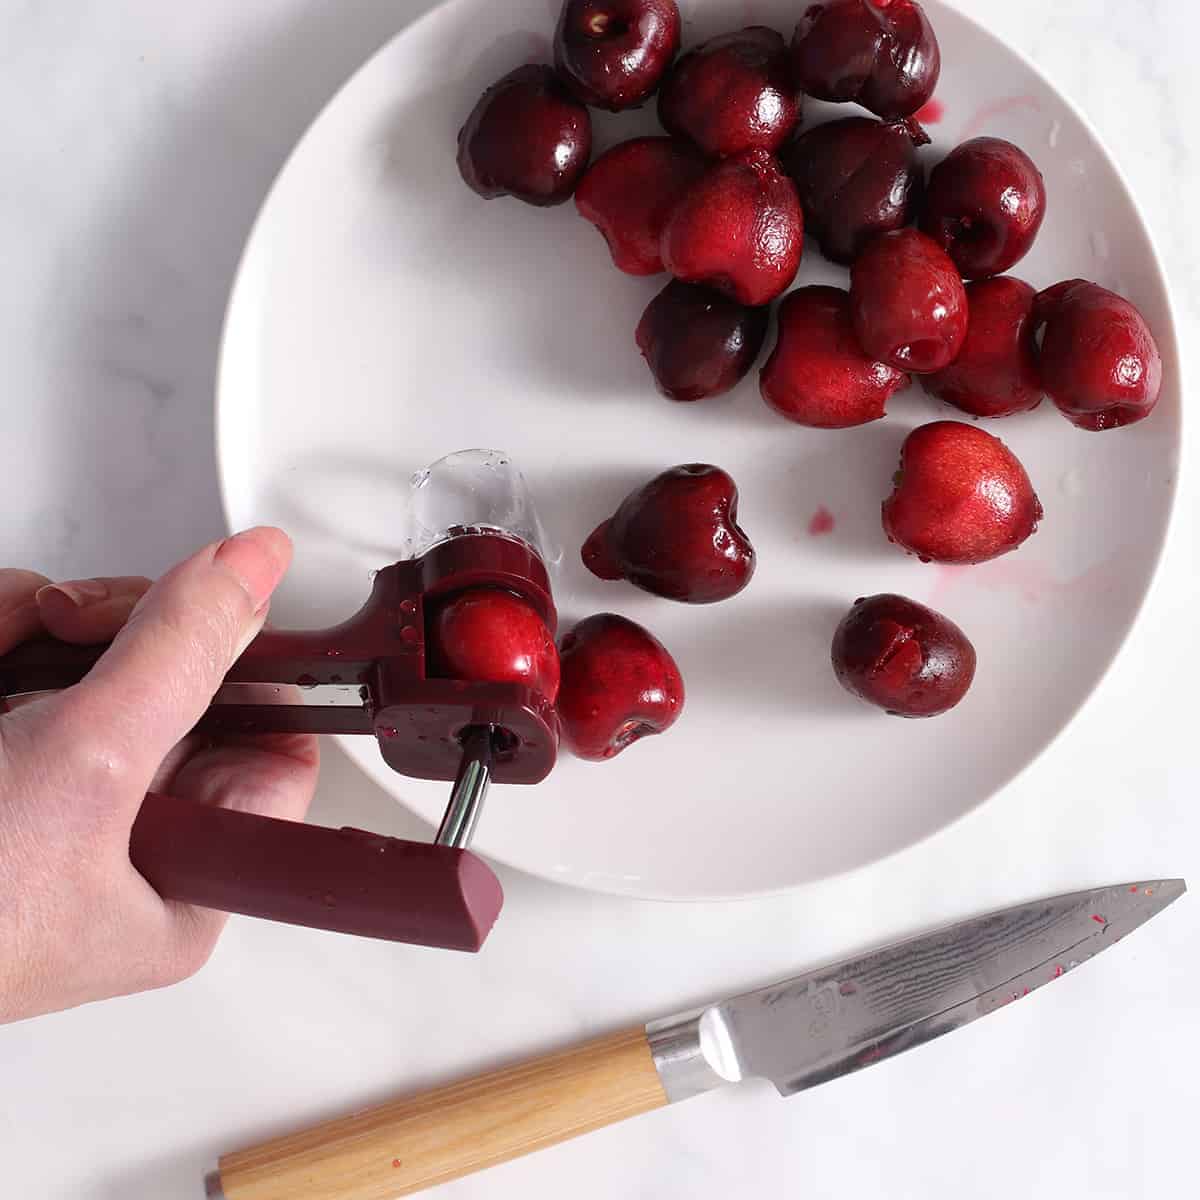 cherry pitter held by hand over a dish of cherries